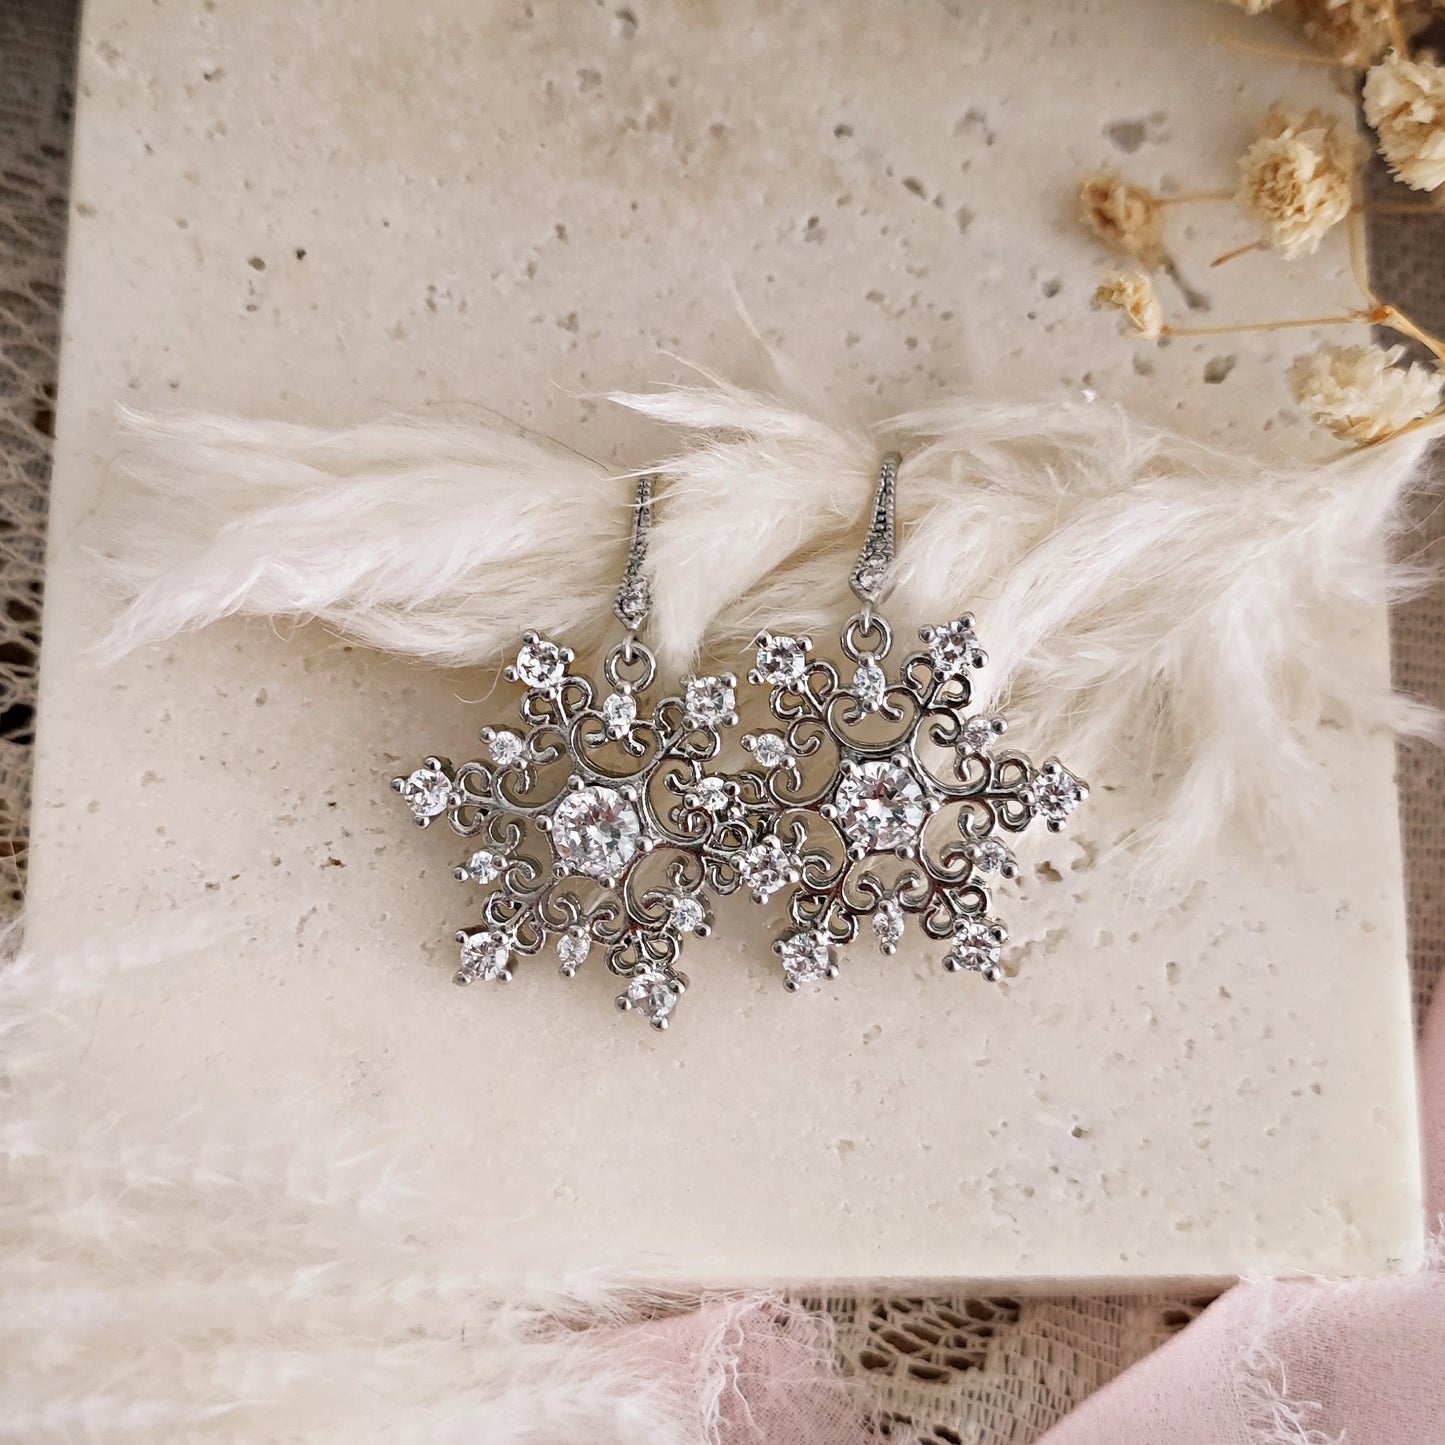 "Snow Queen" earrings in silver plated brass and cubic zirconia